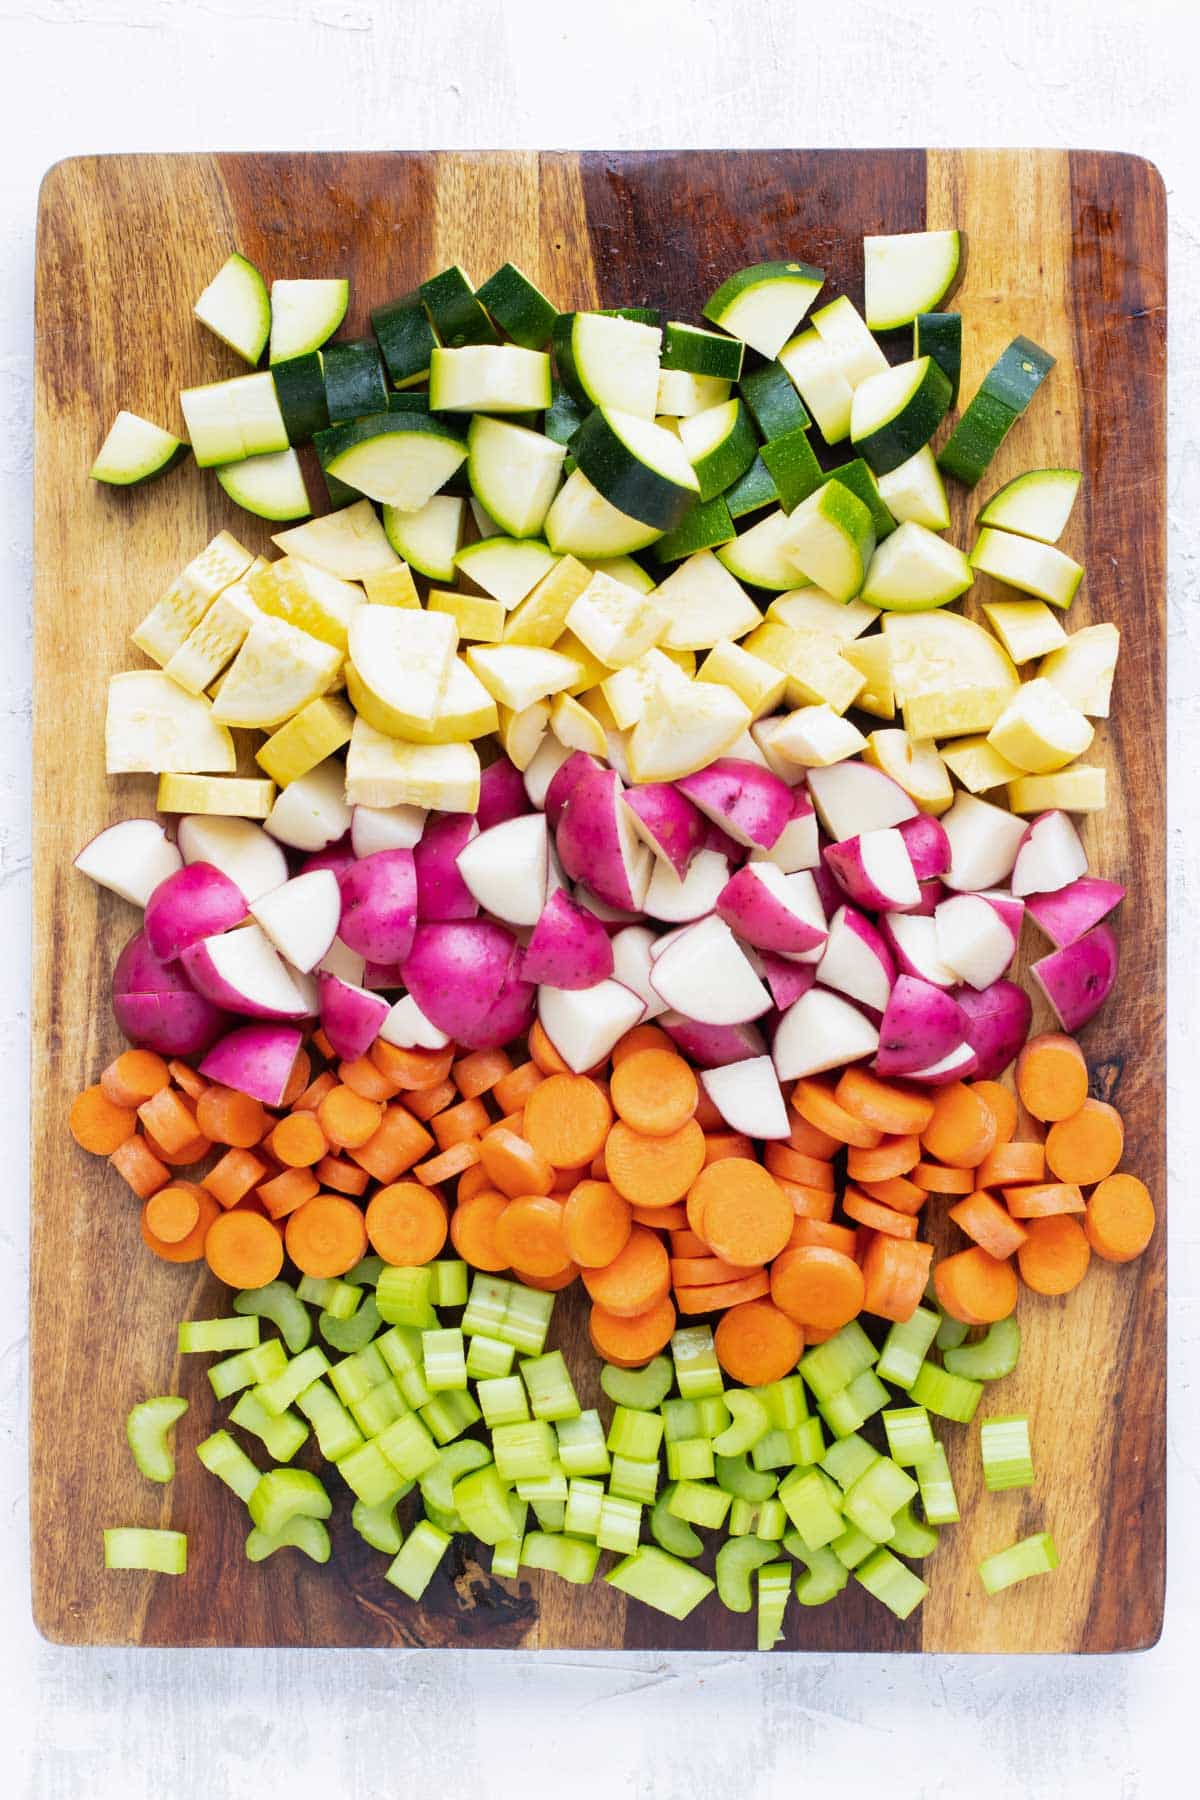 Chopped zucchini, yellow squash, red potatoes, carrots, and celery on a wooden cutting board.